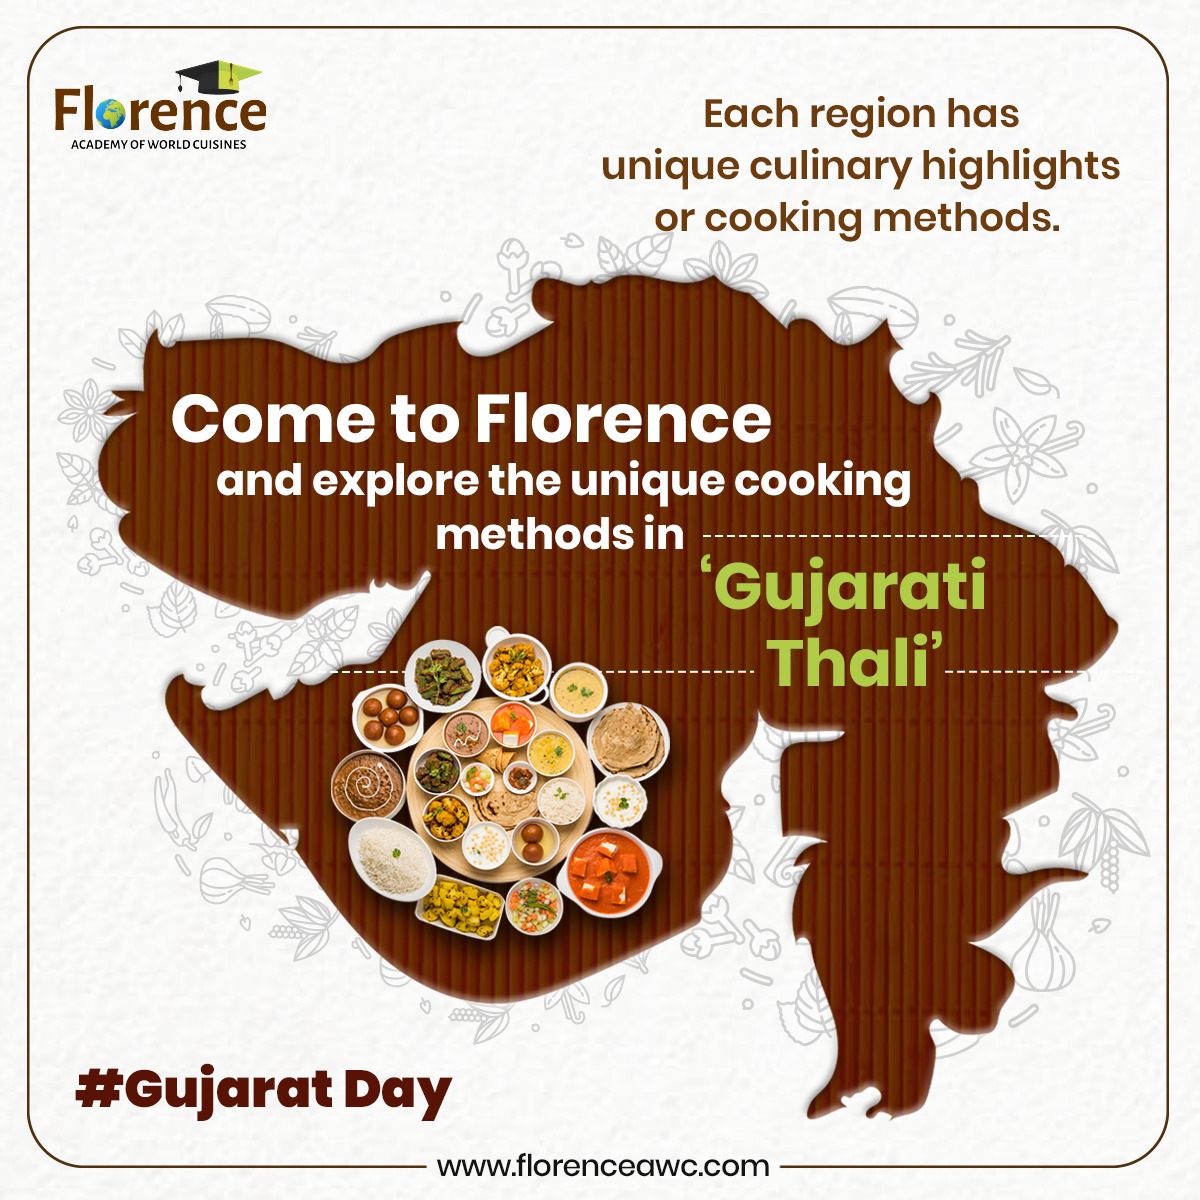 Let’s celebrate this Gujarat Day by uniting people with joy, love, and happiness. Happy Gujarat Day!

#florenceacademy #florence #happygujaratday #gujju #gujaratday #prideofindia #jewelofwest #gujaratfood #gujaratcuidine #cuisine #thali #gujaratstate #gujarat #academy #courses